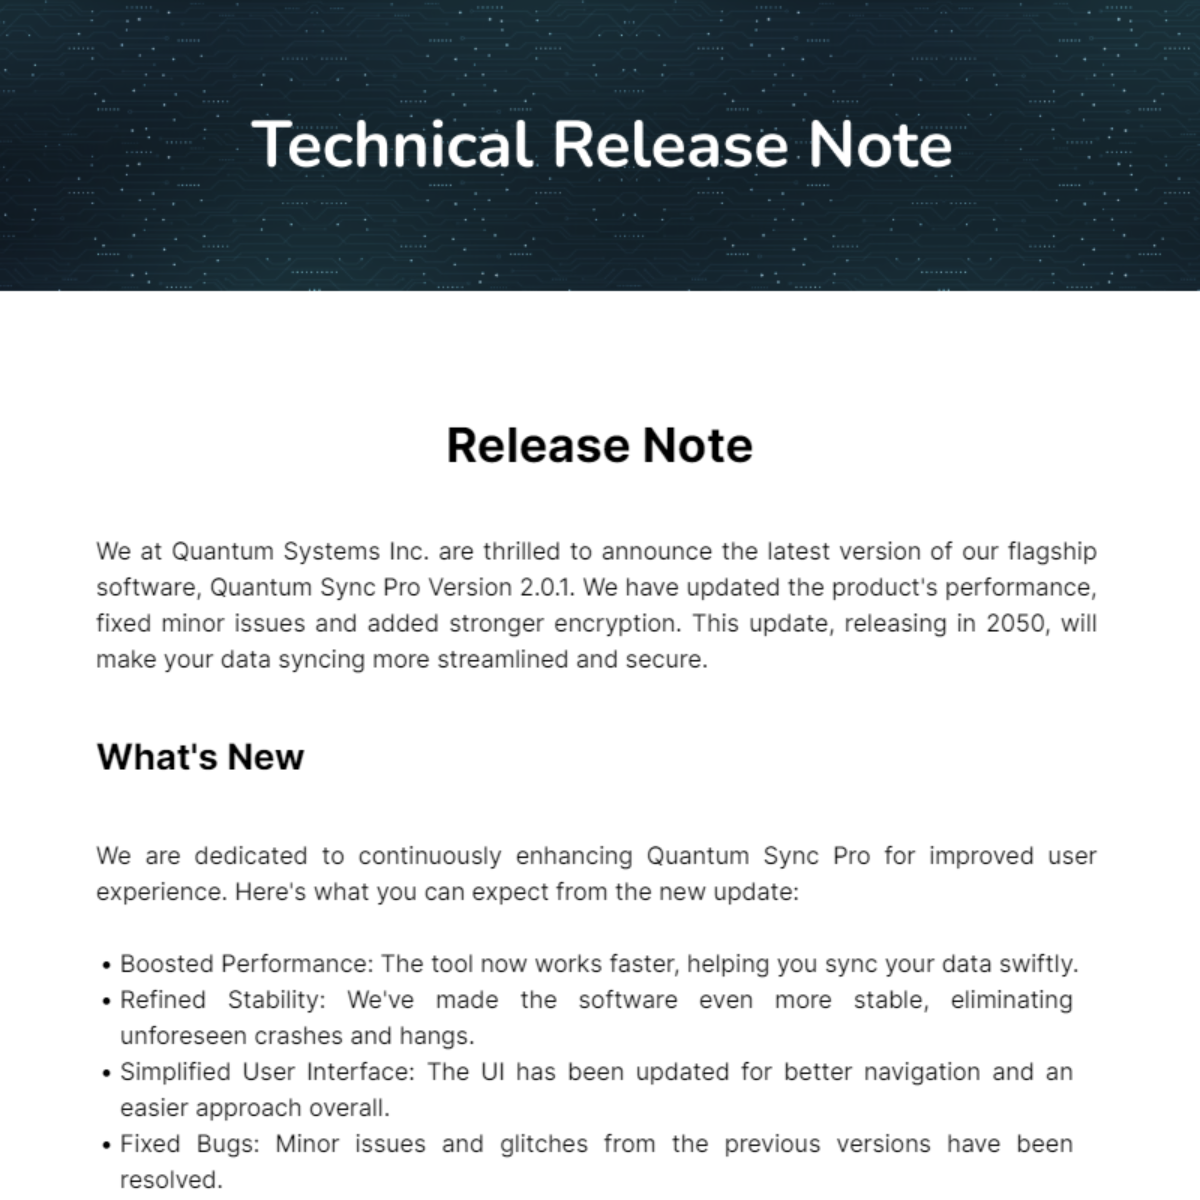 Technical Release Note Template